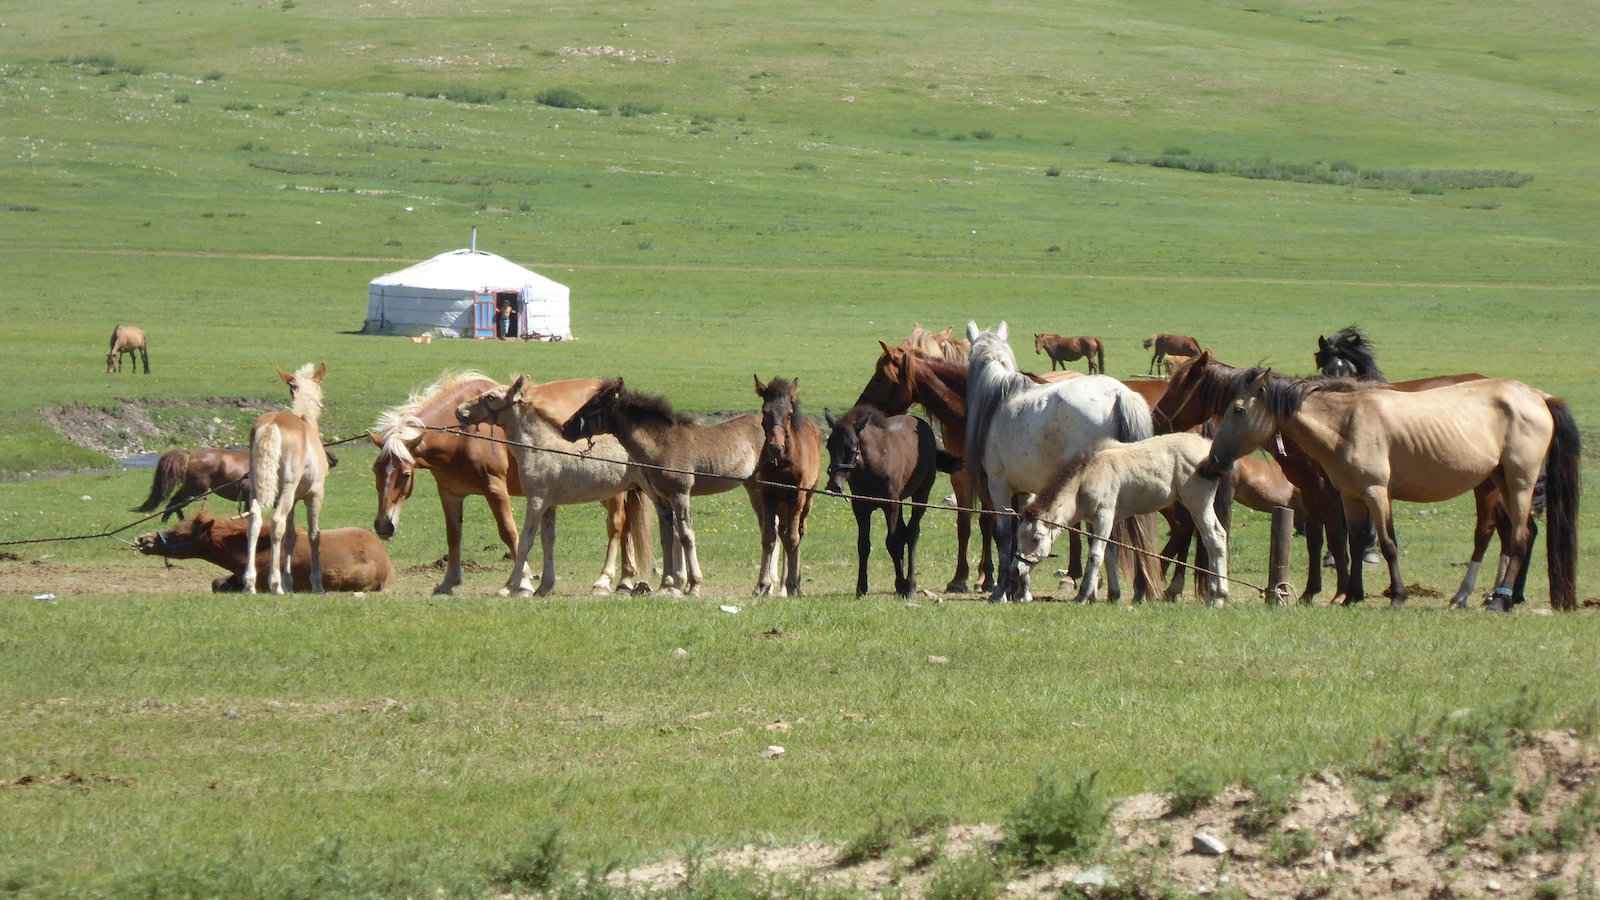 Horses are very important to Mongolians both in practicality and for spiritual reasons